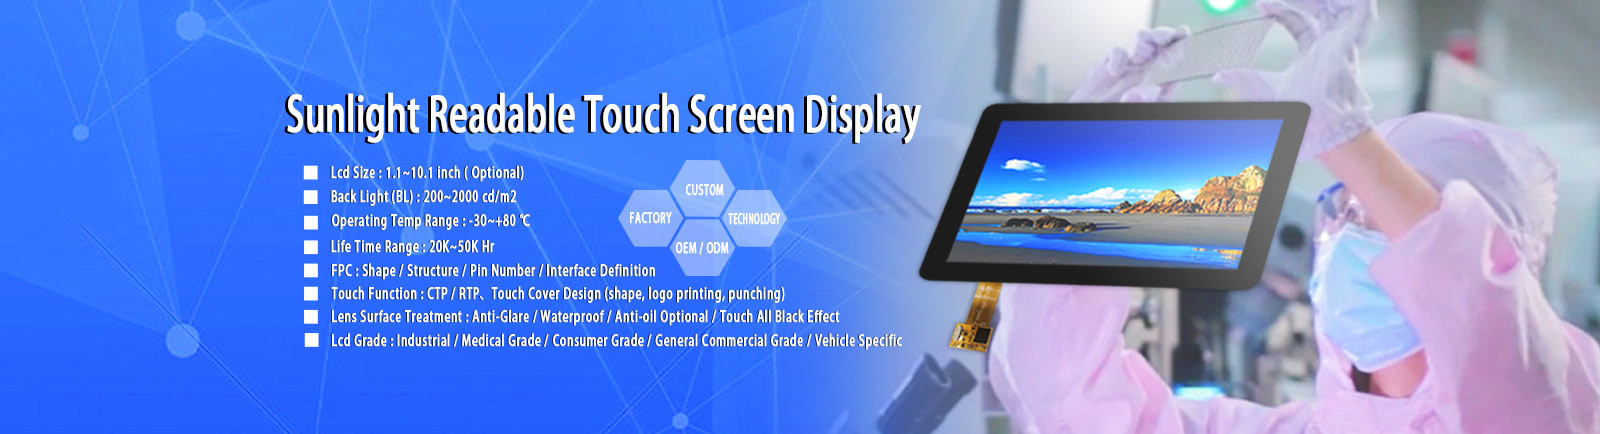 TFT LCD Capacitive Touchscreen